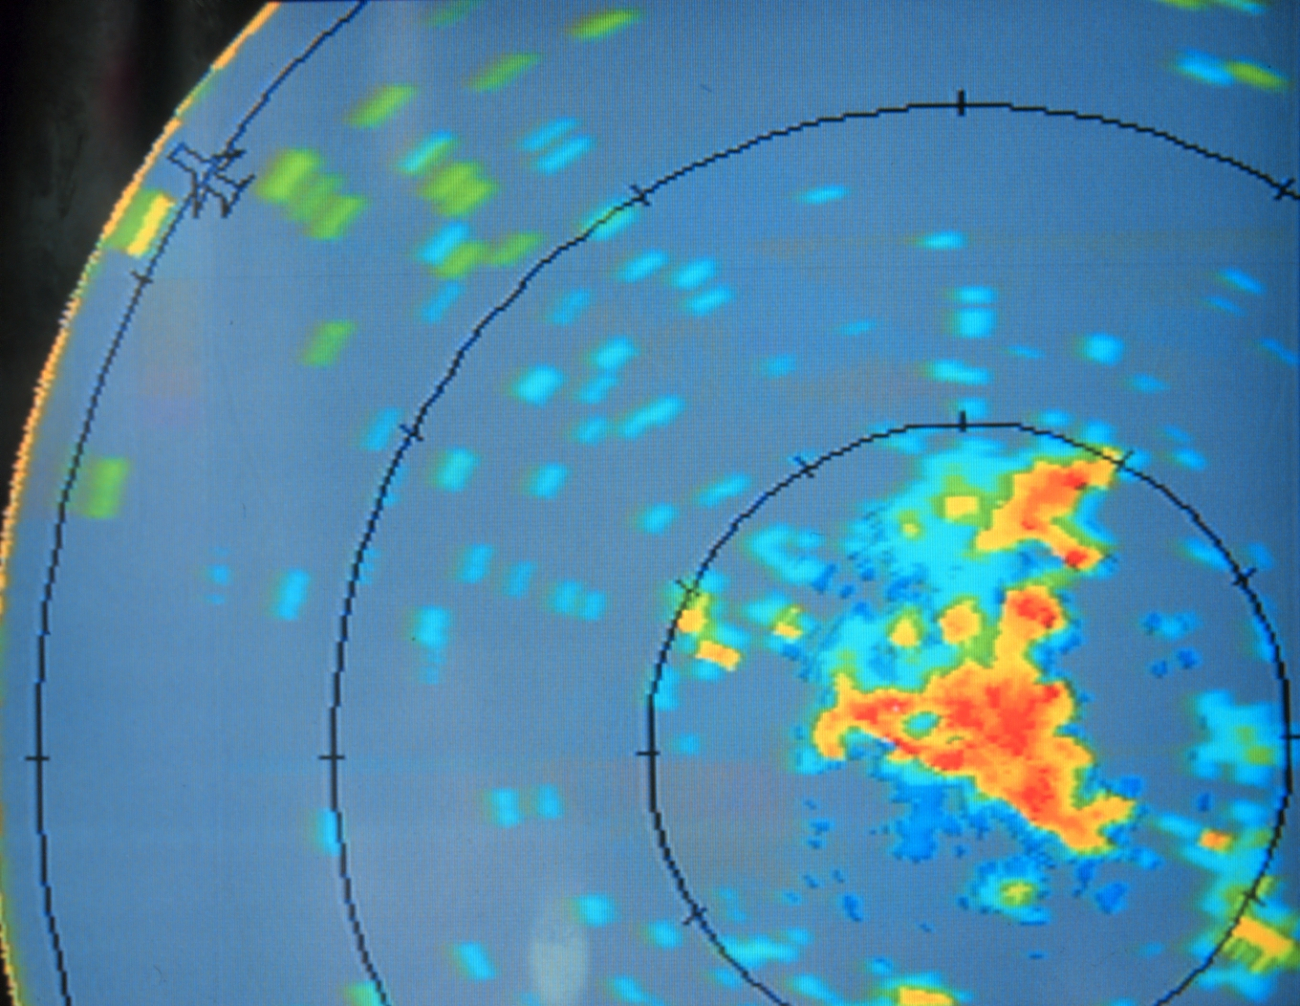 Radar image of thunderstorm complex observed from NOAA P-3